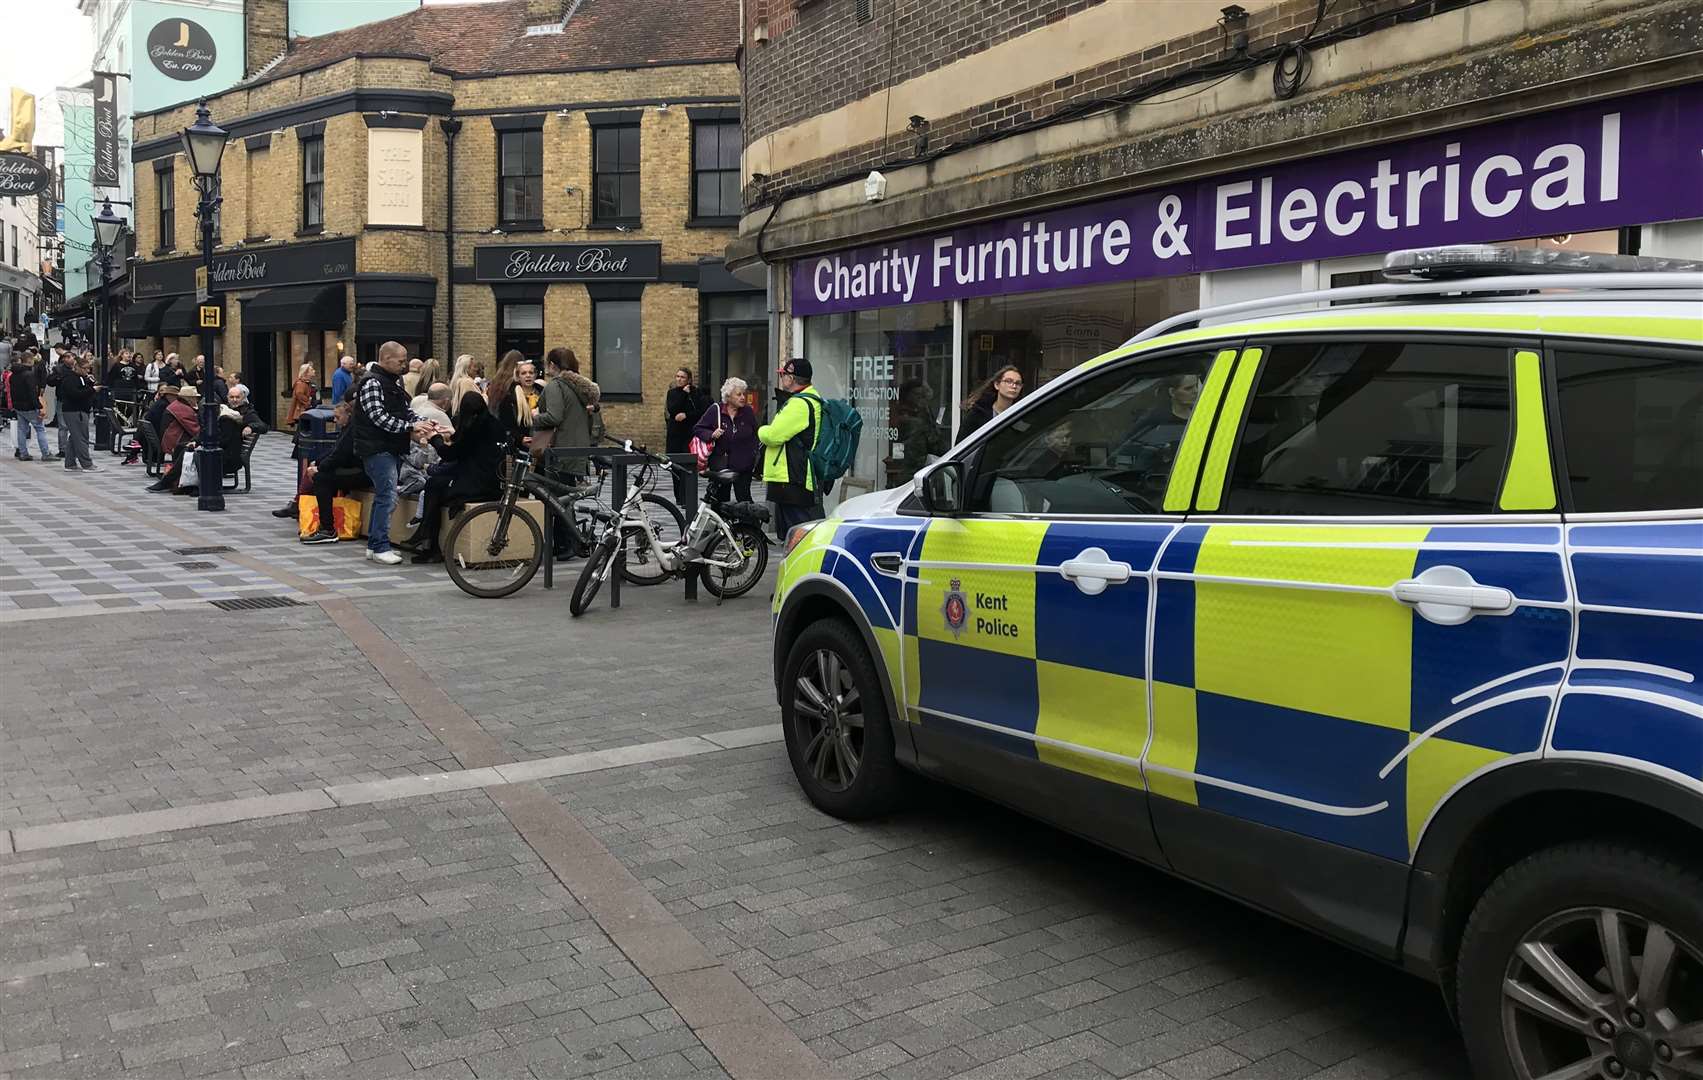 The Mall, Maidstone has been evacuated, police are at the scene